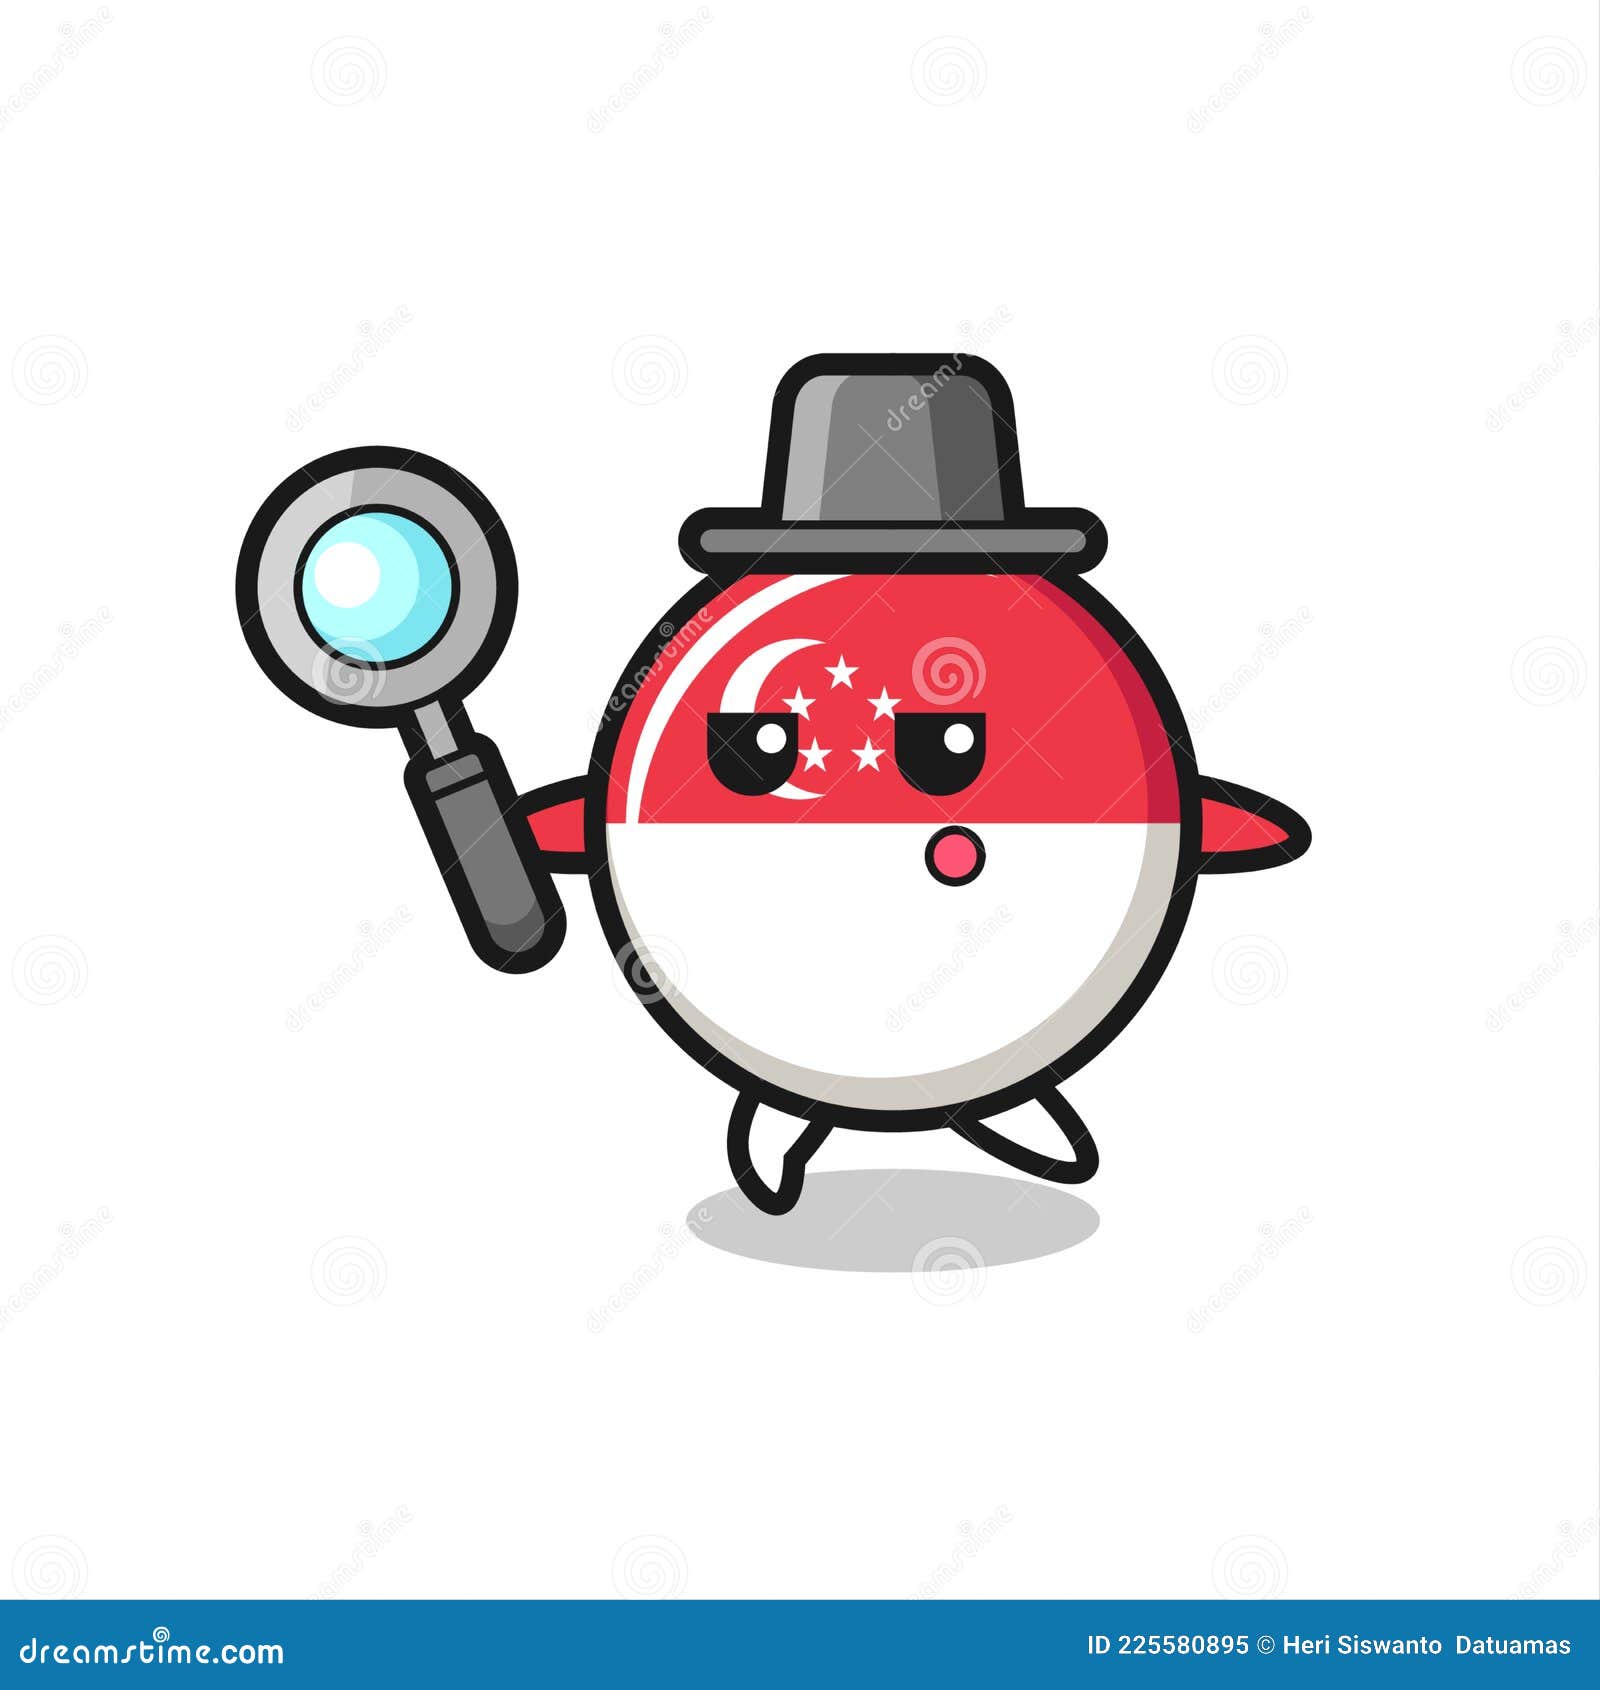 Singapore Flag Badge Cartoon Character Searching with a Magnifying Glass  Stock Vector - Illustration of asia, information: 225580895